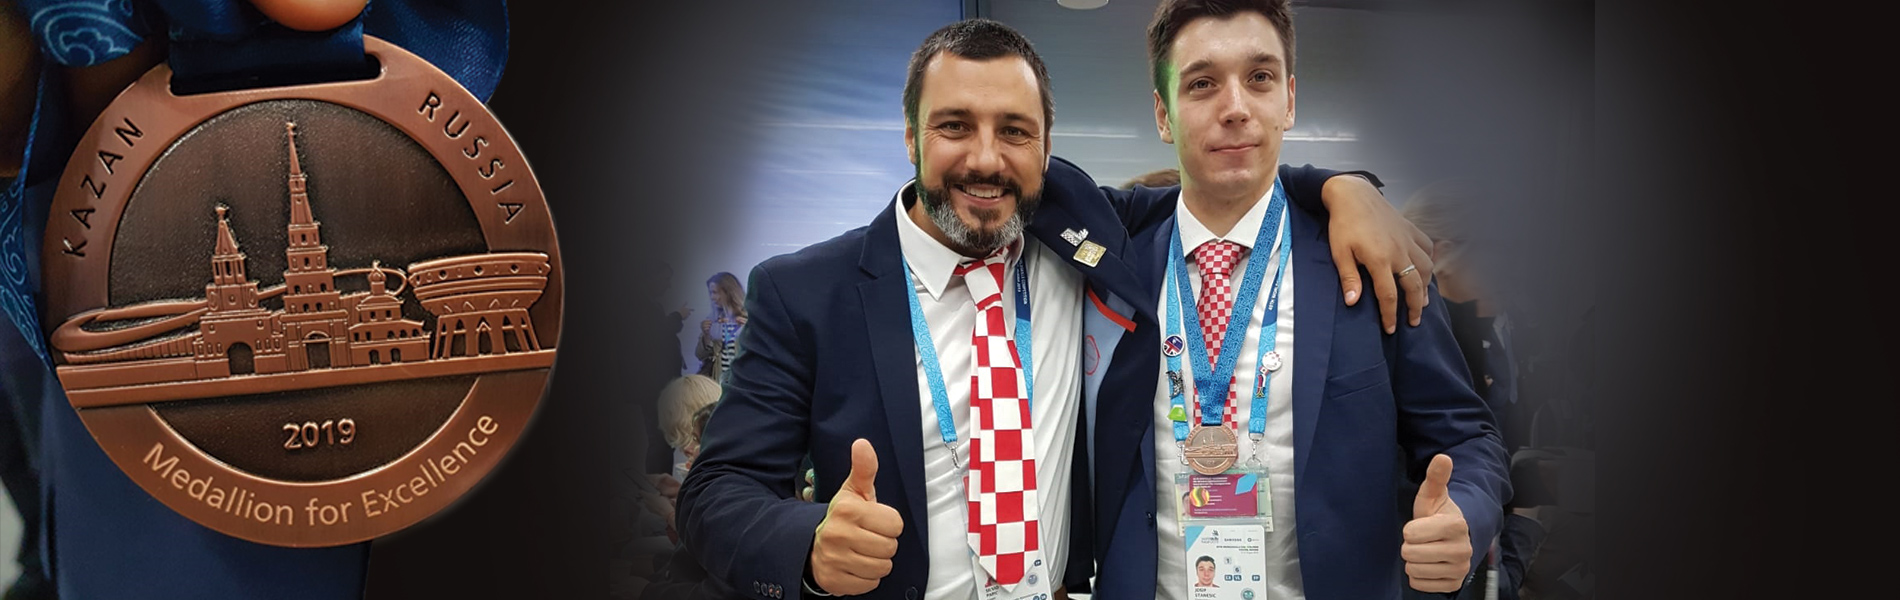 Image for Our student Josip Stanešić won the 12th place in the world at 2019 WorldSkills Kazan